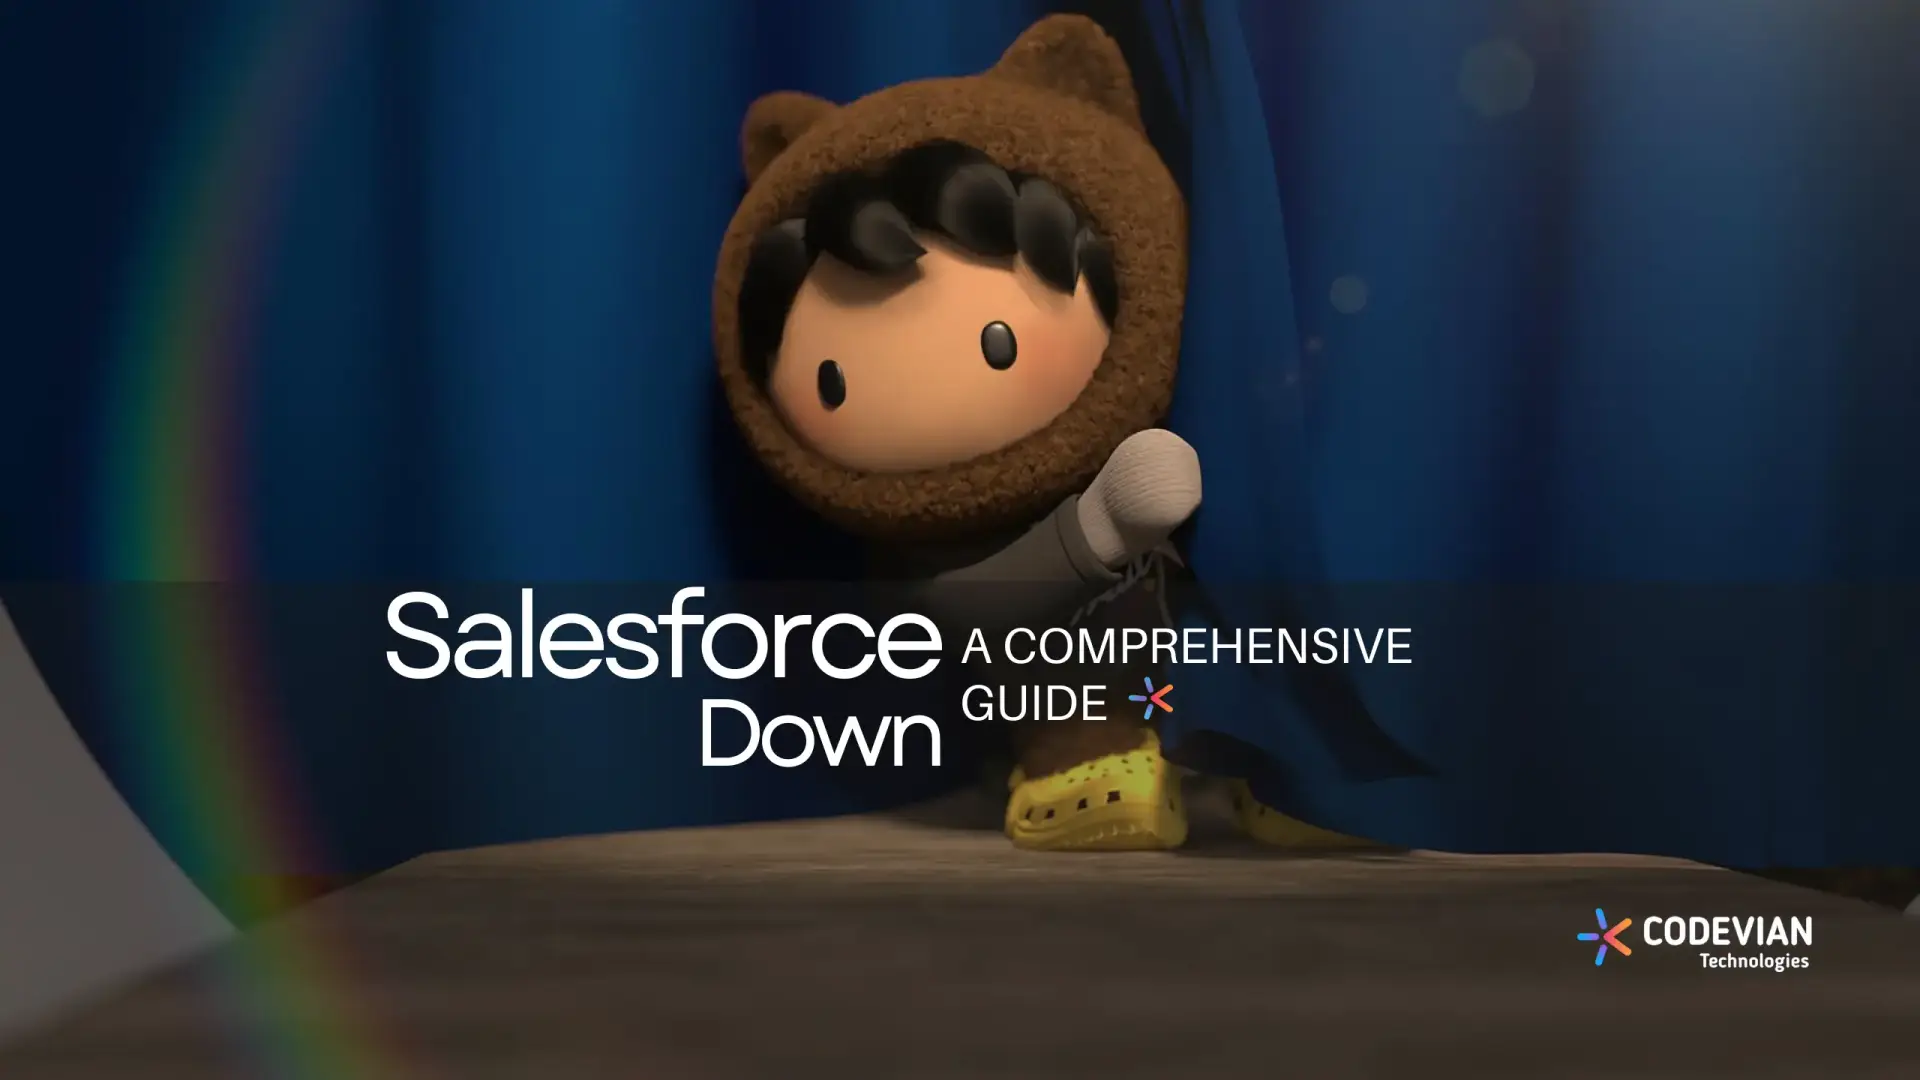 A Guide for Salesforce down problems